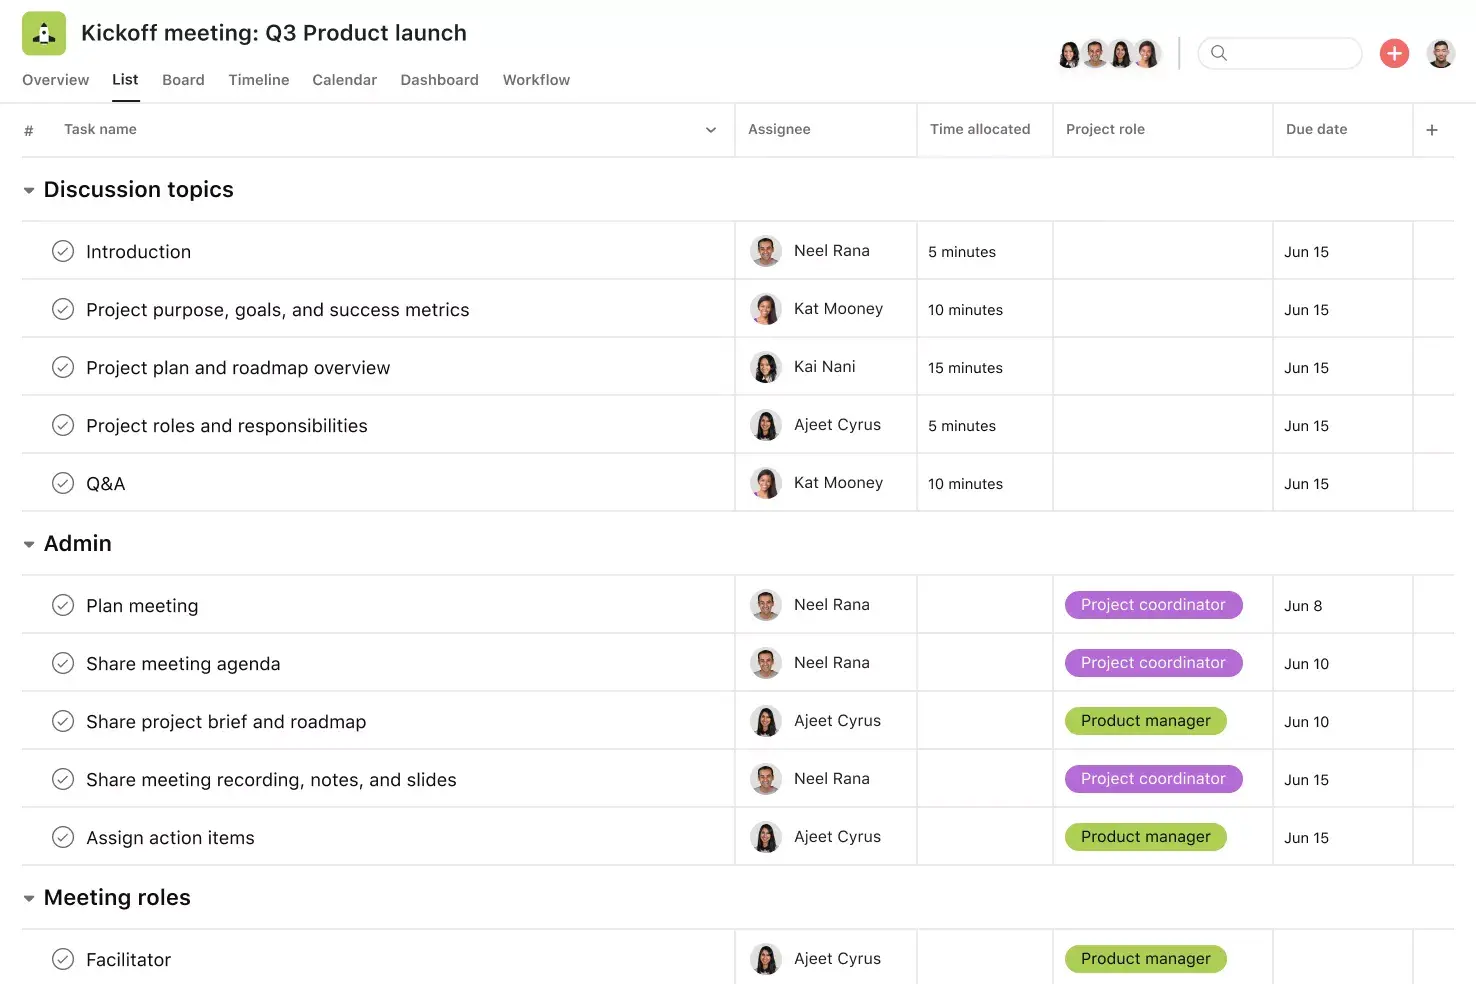 [Product ui] Kickoff meeting project in Asana, spreadsheet-style view (List)